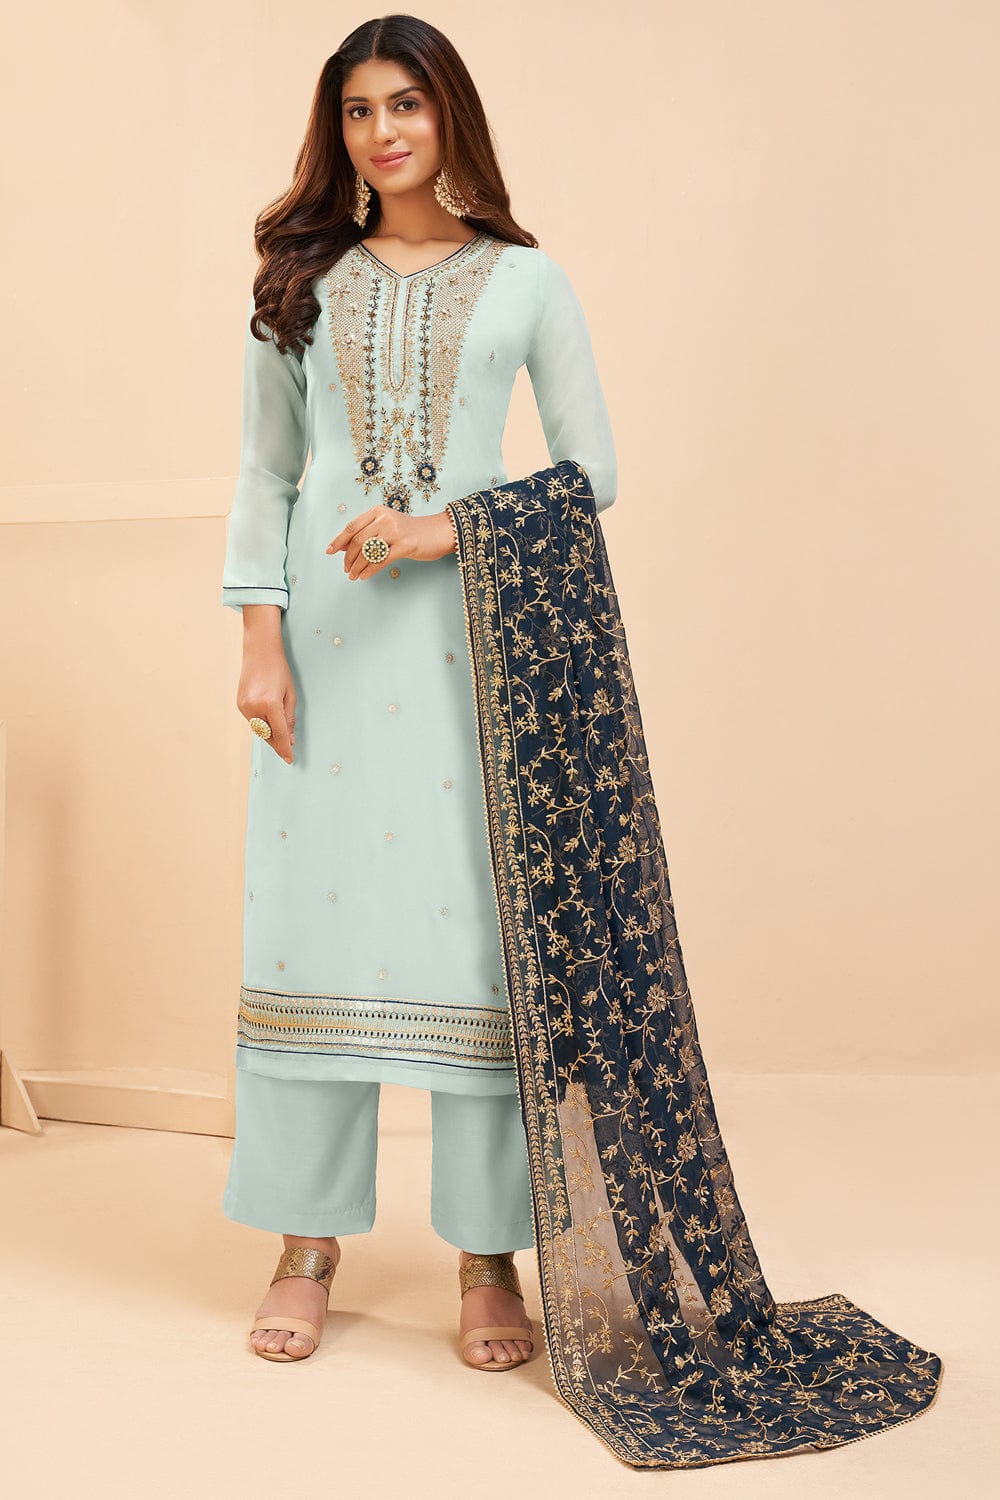 Gull Jee Premium Rang Pasand Cotton Unstitched Embroidered Salwar Kameez  For Women - A3 - Sky Blue